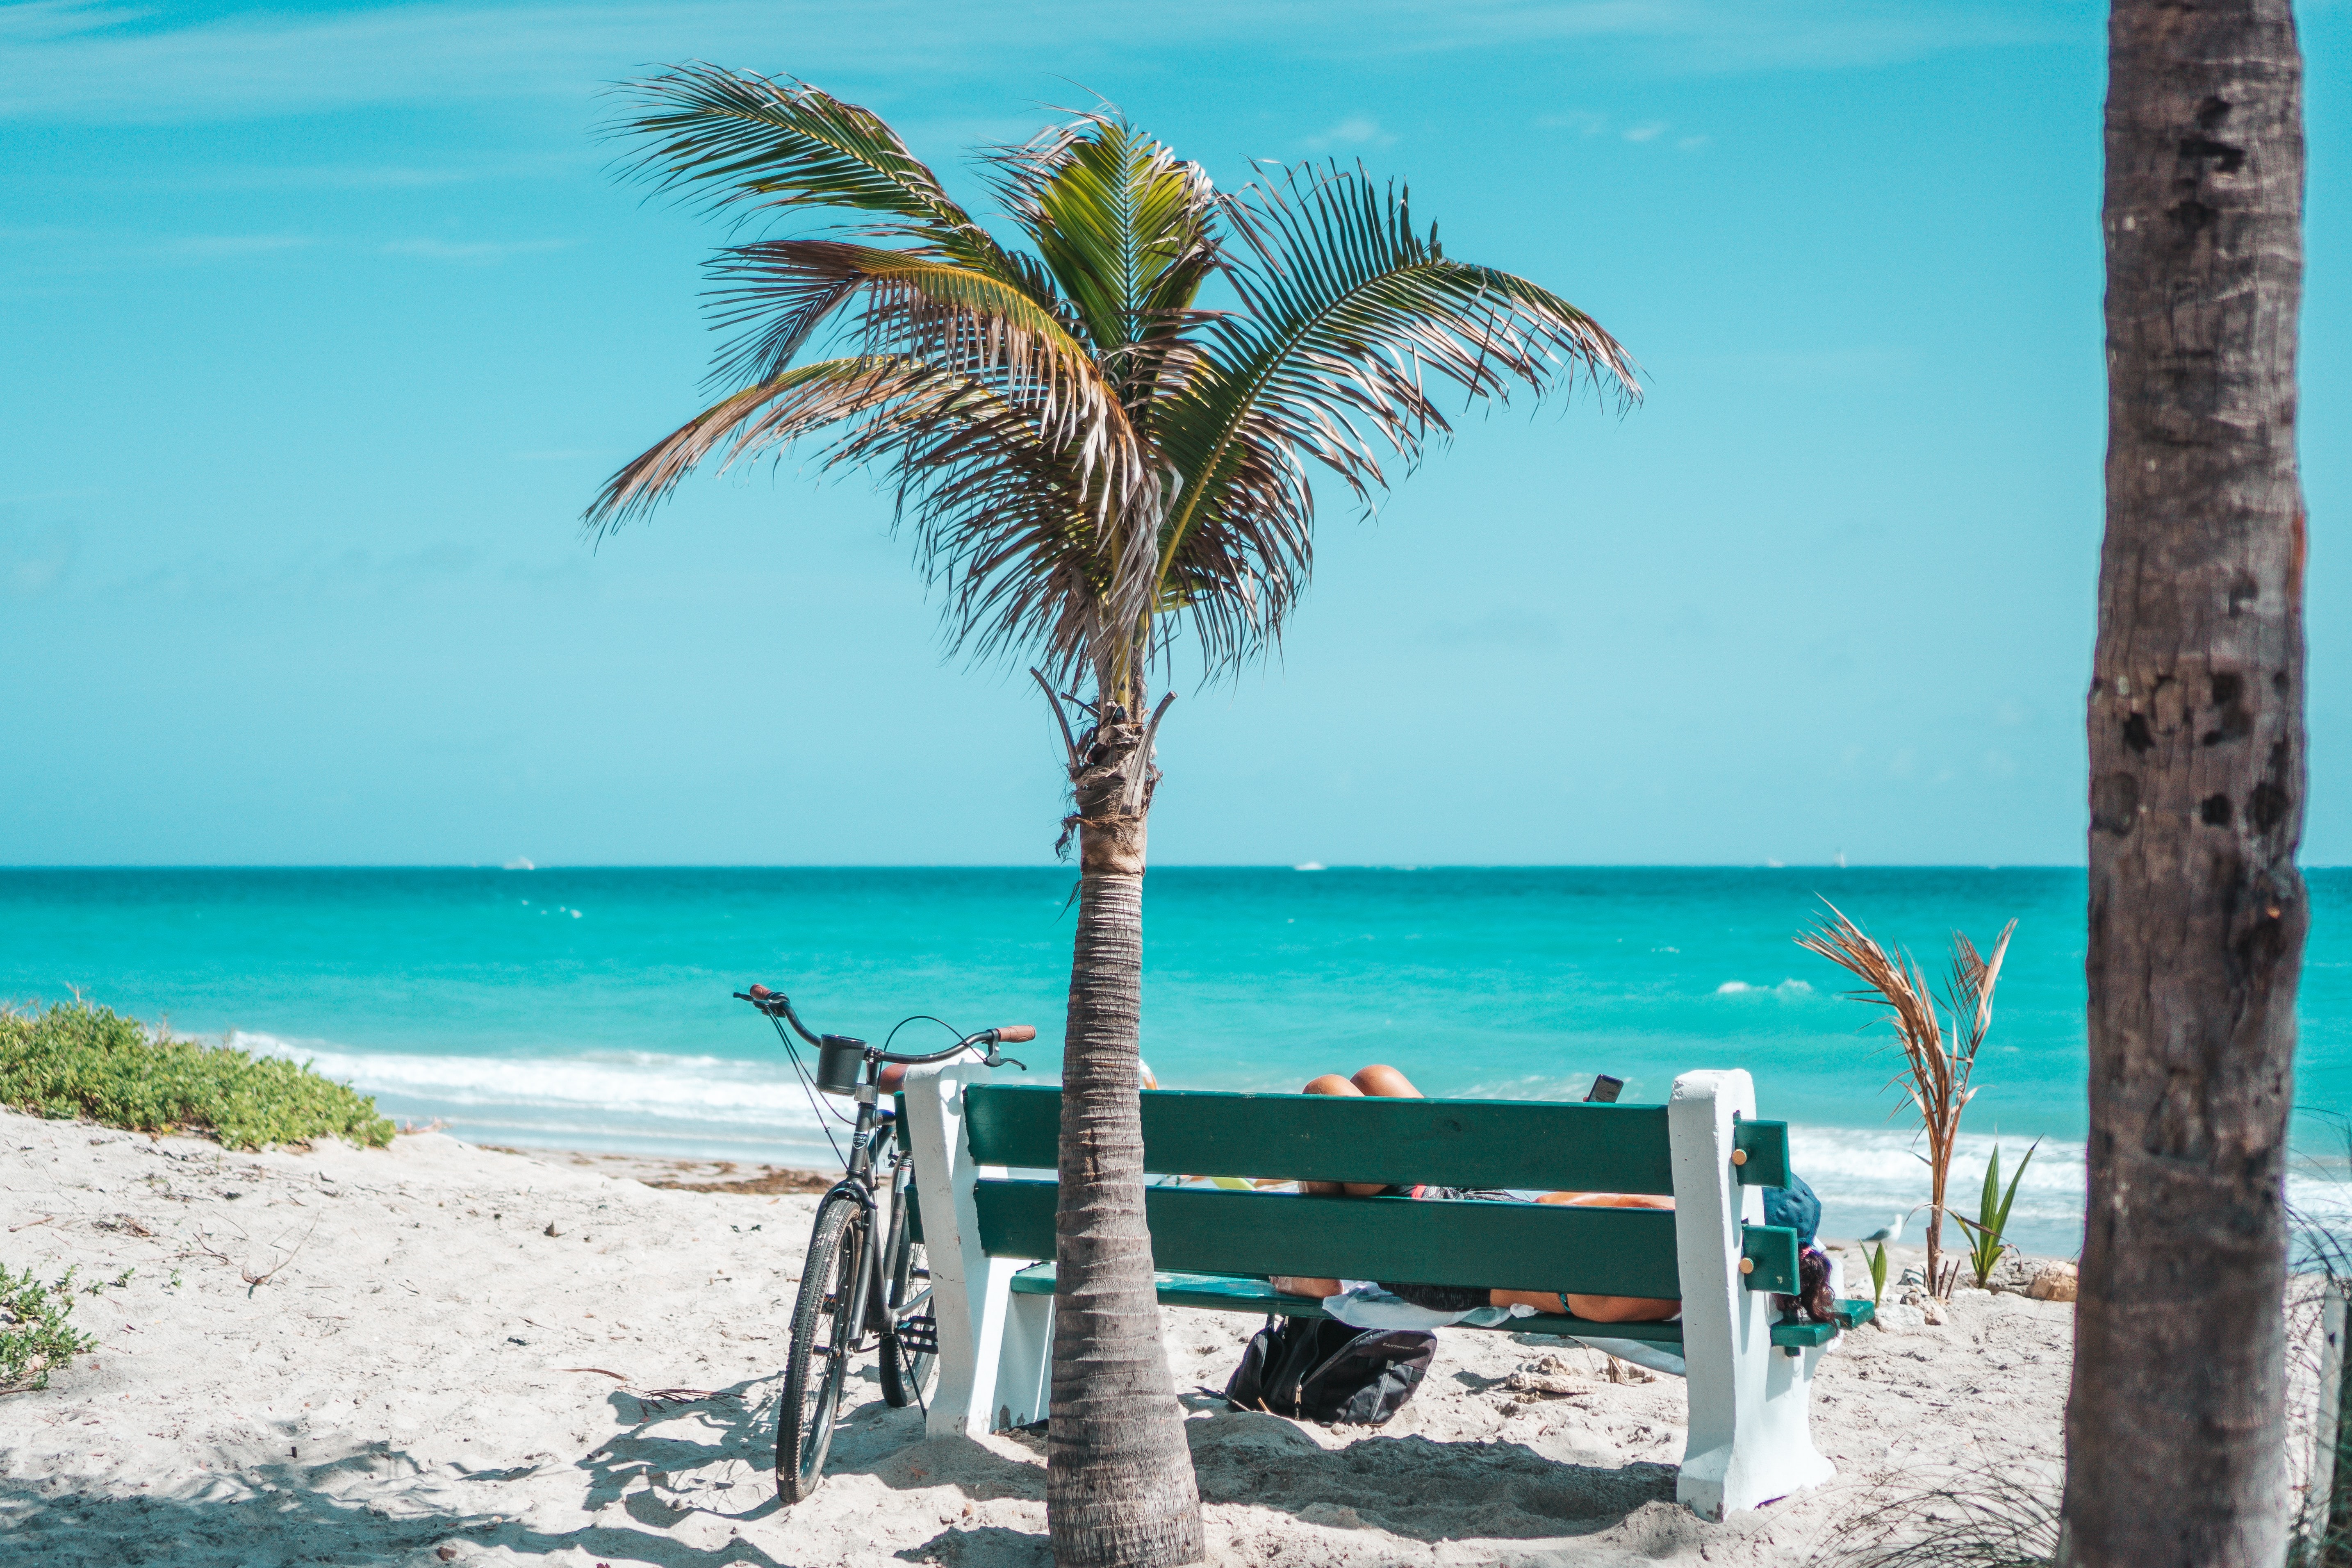 Turquoise water and bright sand with a bench, small palm tree, and e-bike on a Florida beach